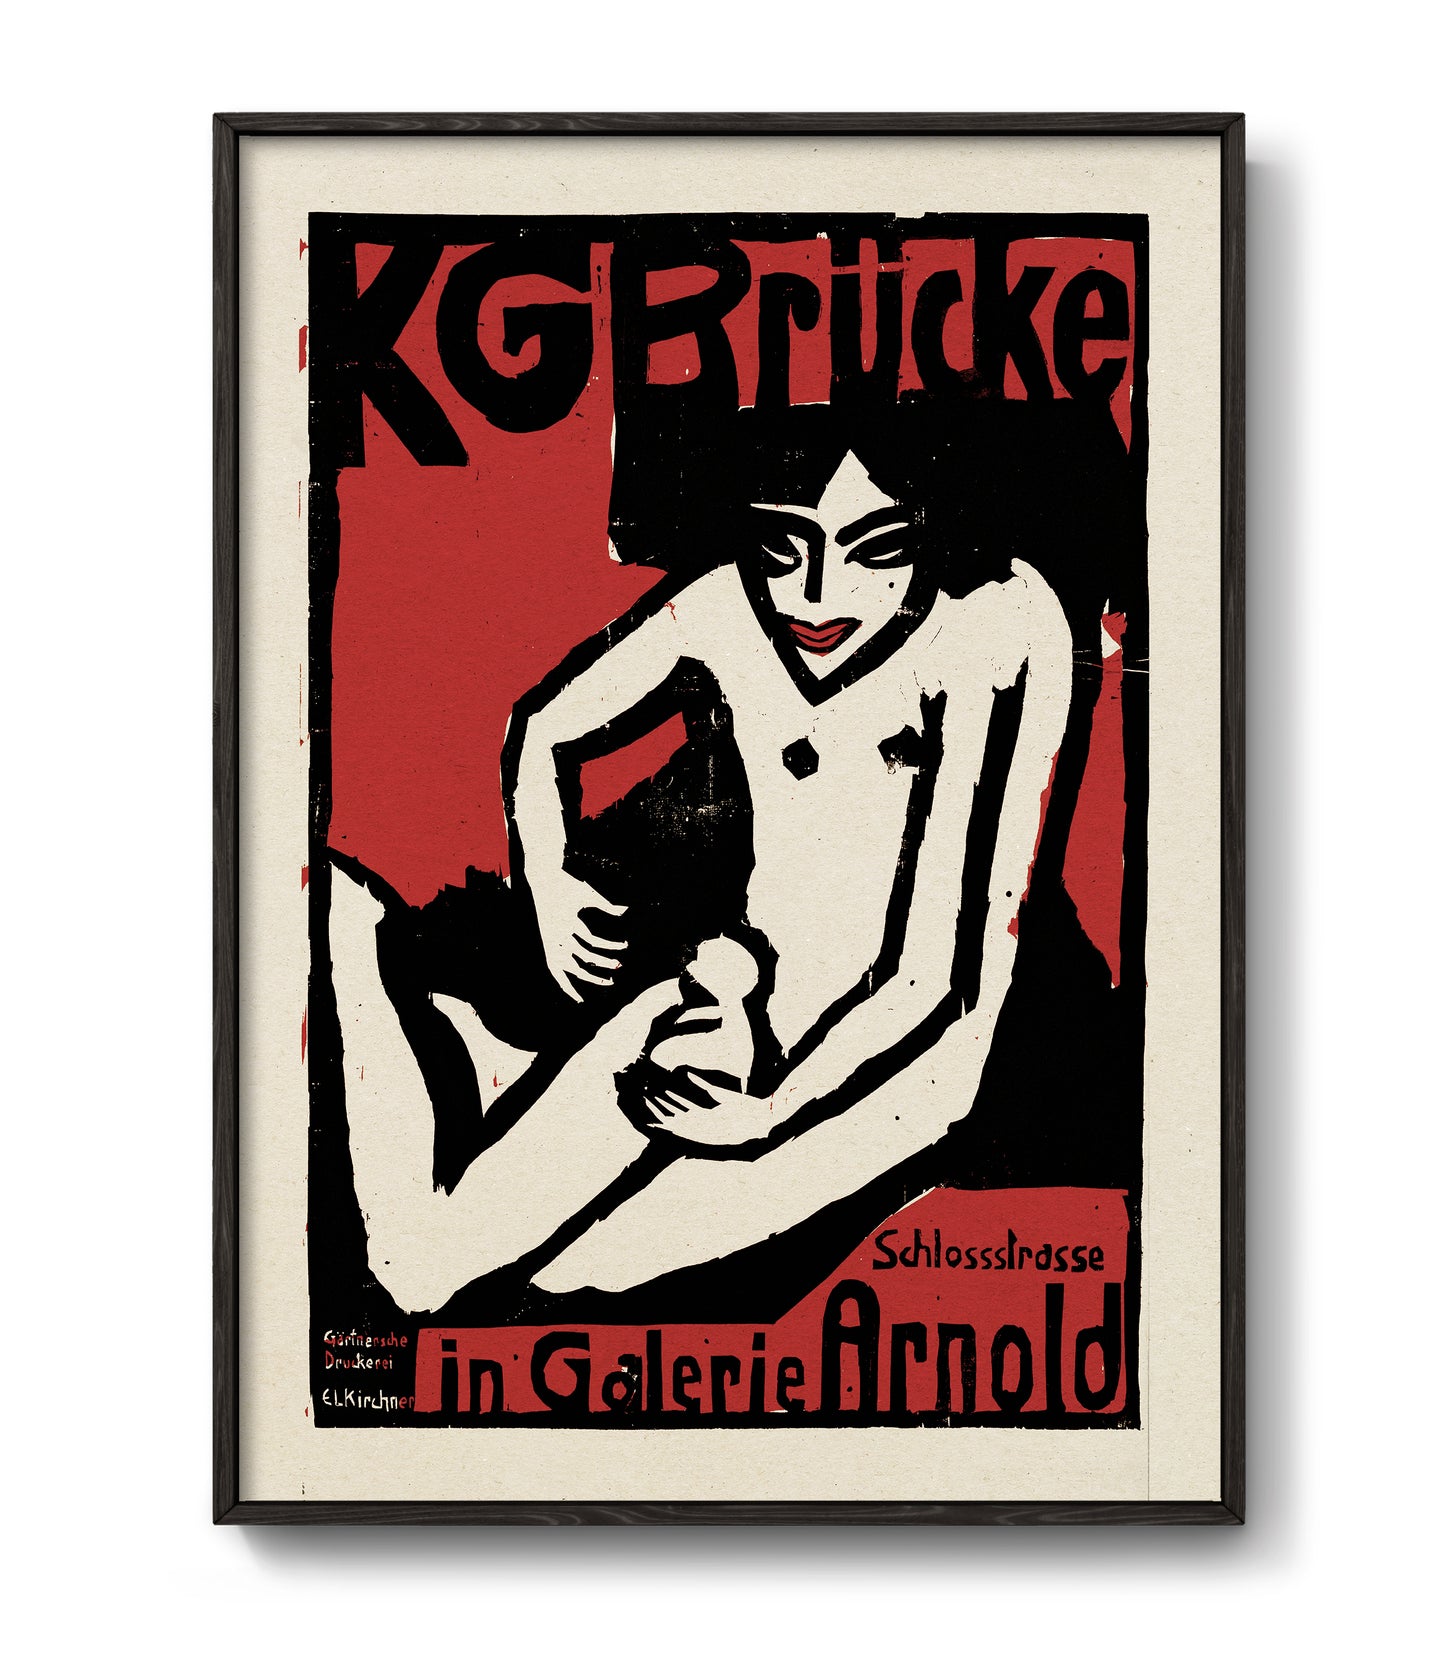 Exhibition poster by Ernst Ludwig Kirchner